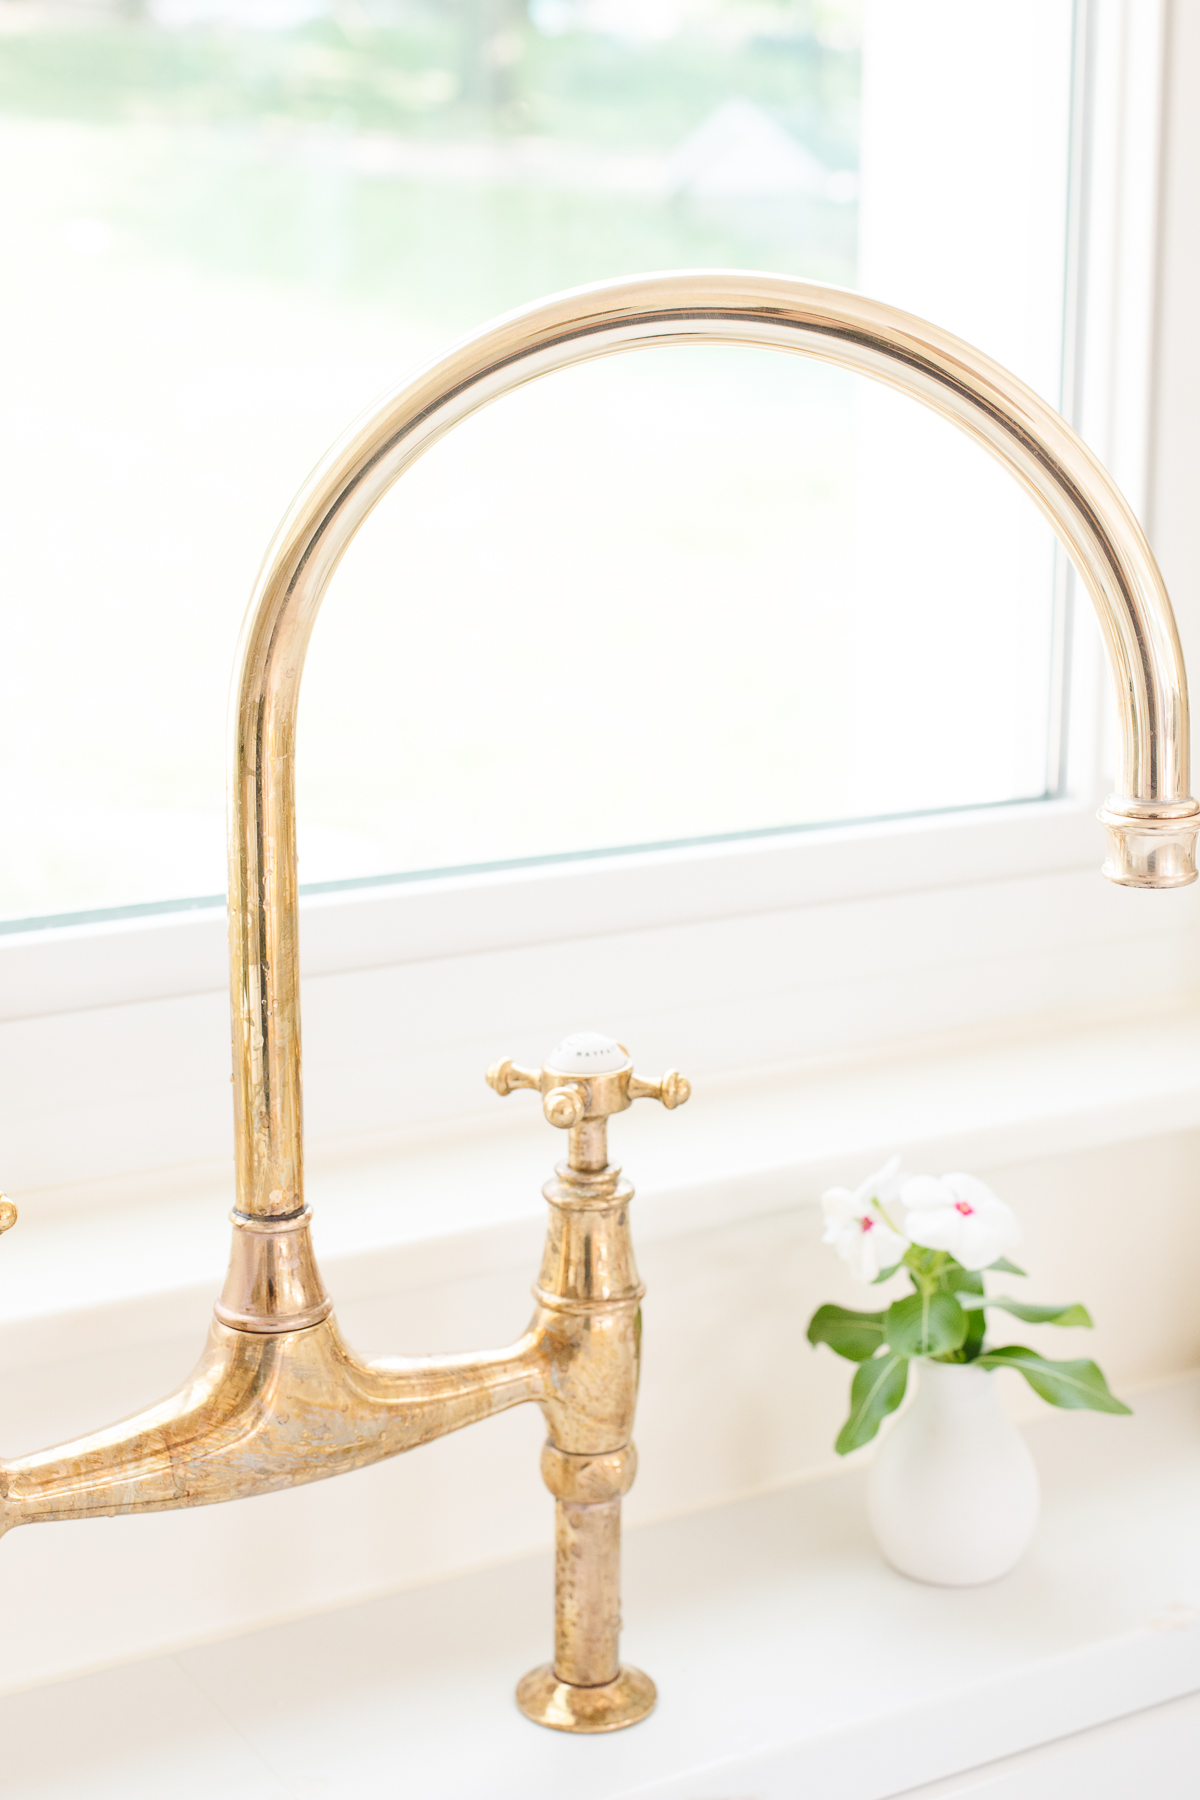 An unlacquered brass kitchen faucet in a white kitchen.